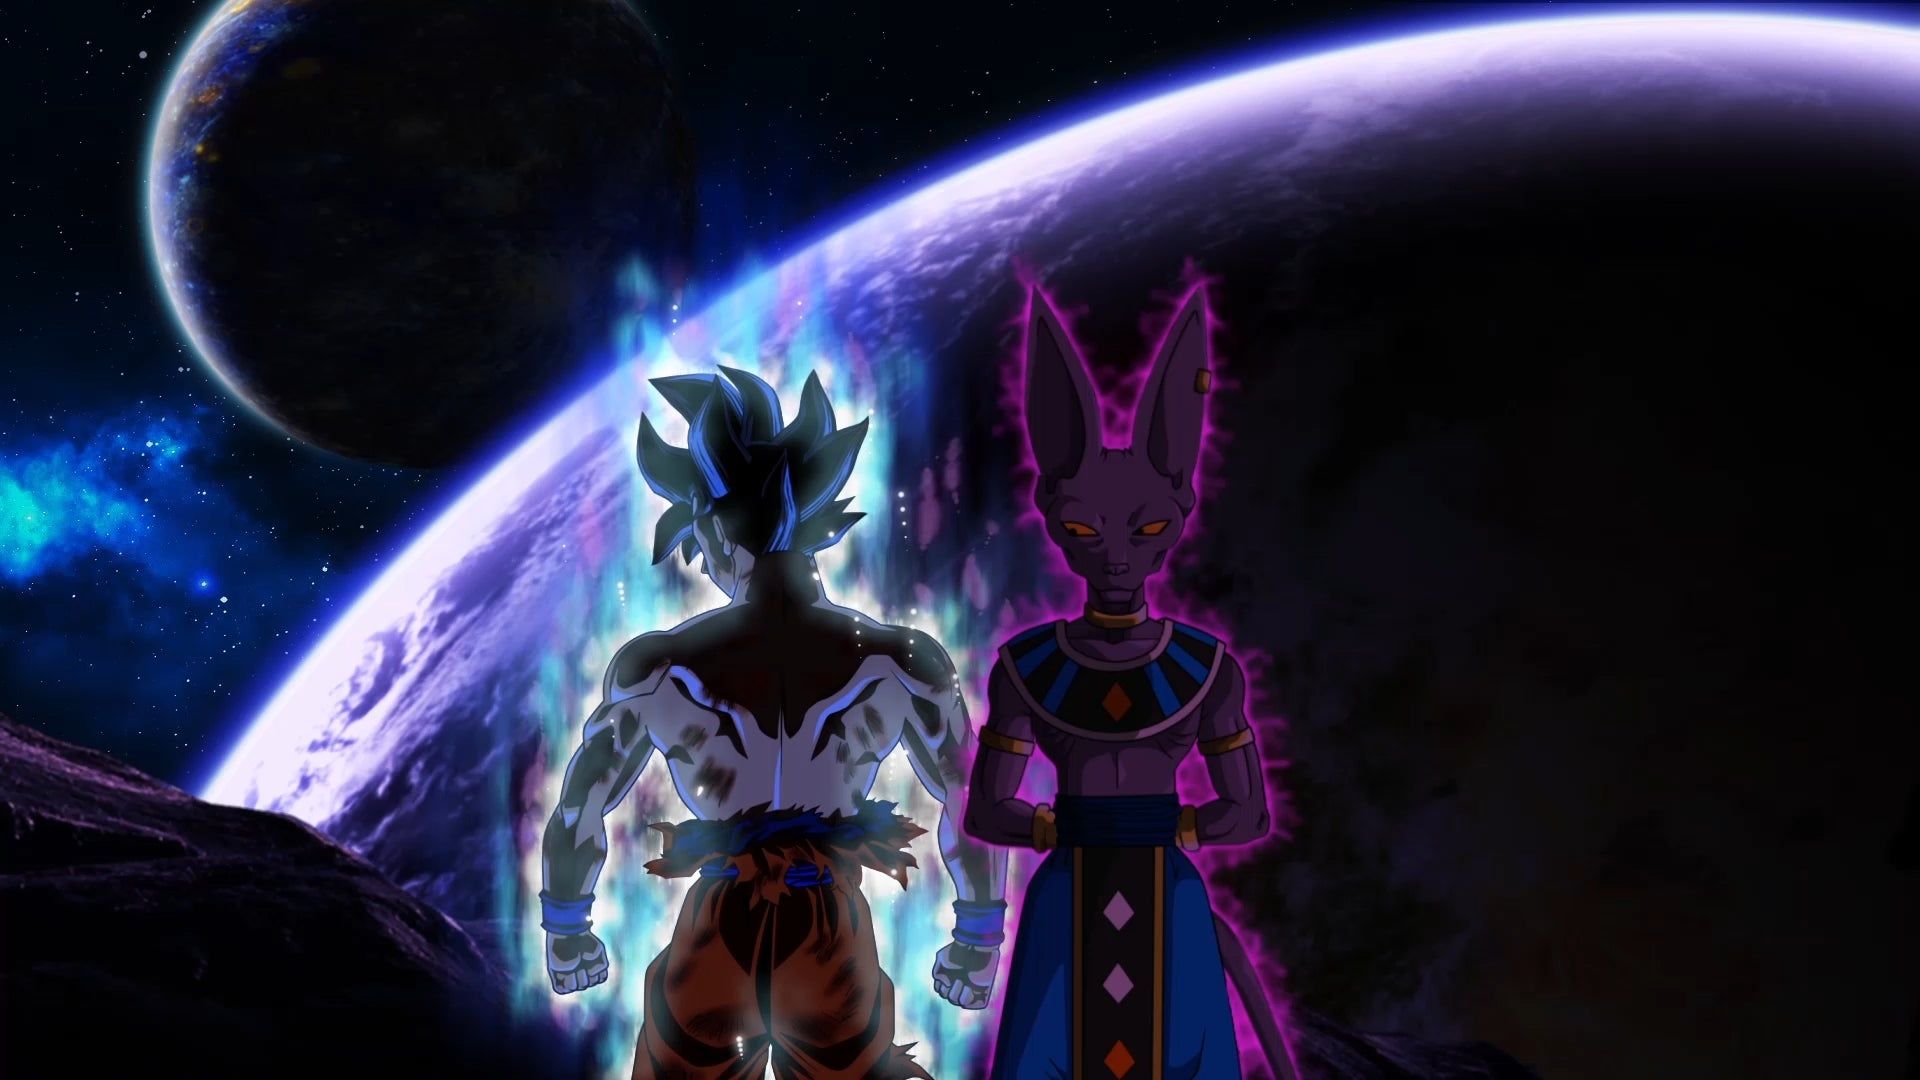 Second attempt at making an animated wallpaper Goku Vs Beerus